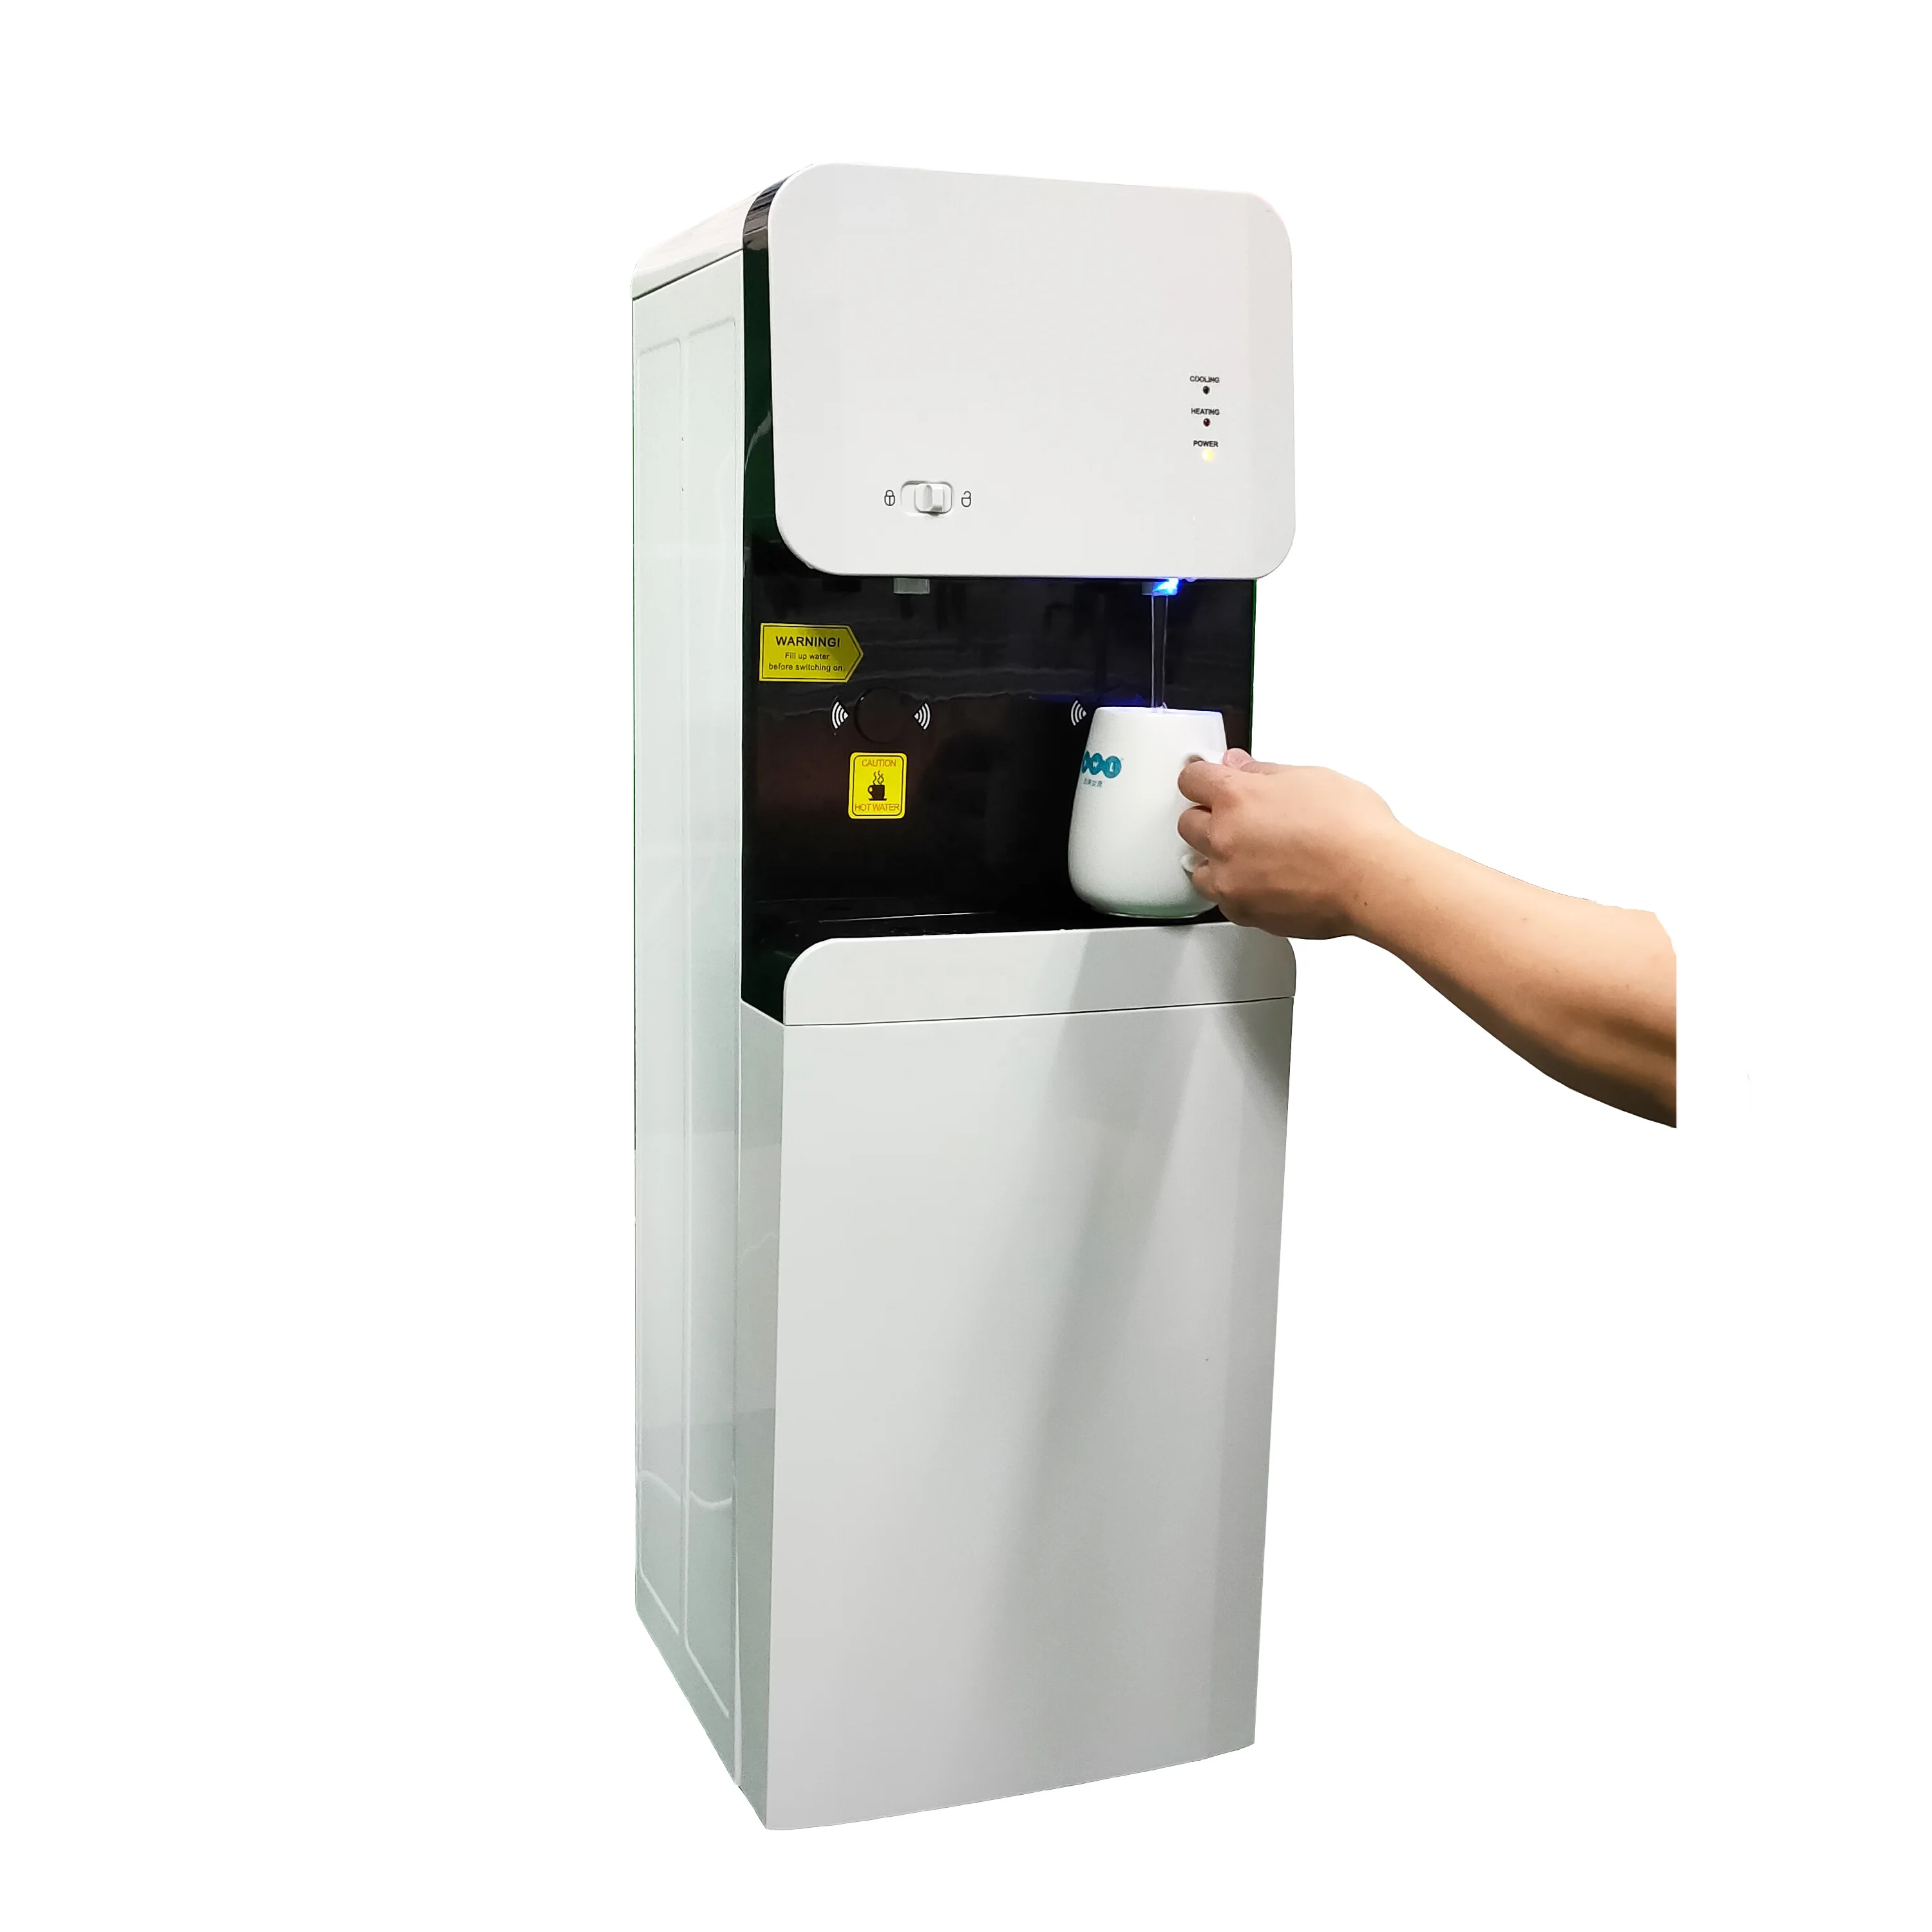 new design touchless water dispenser hot cold water for office school